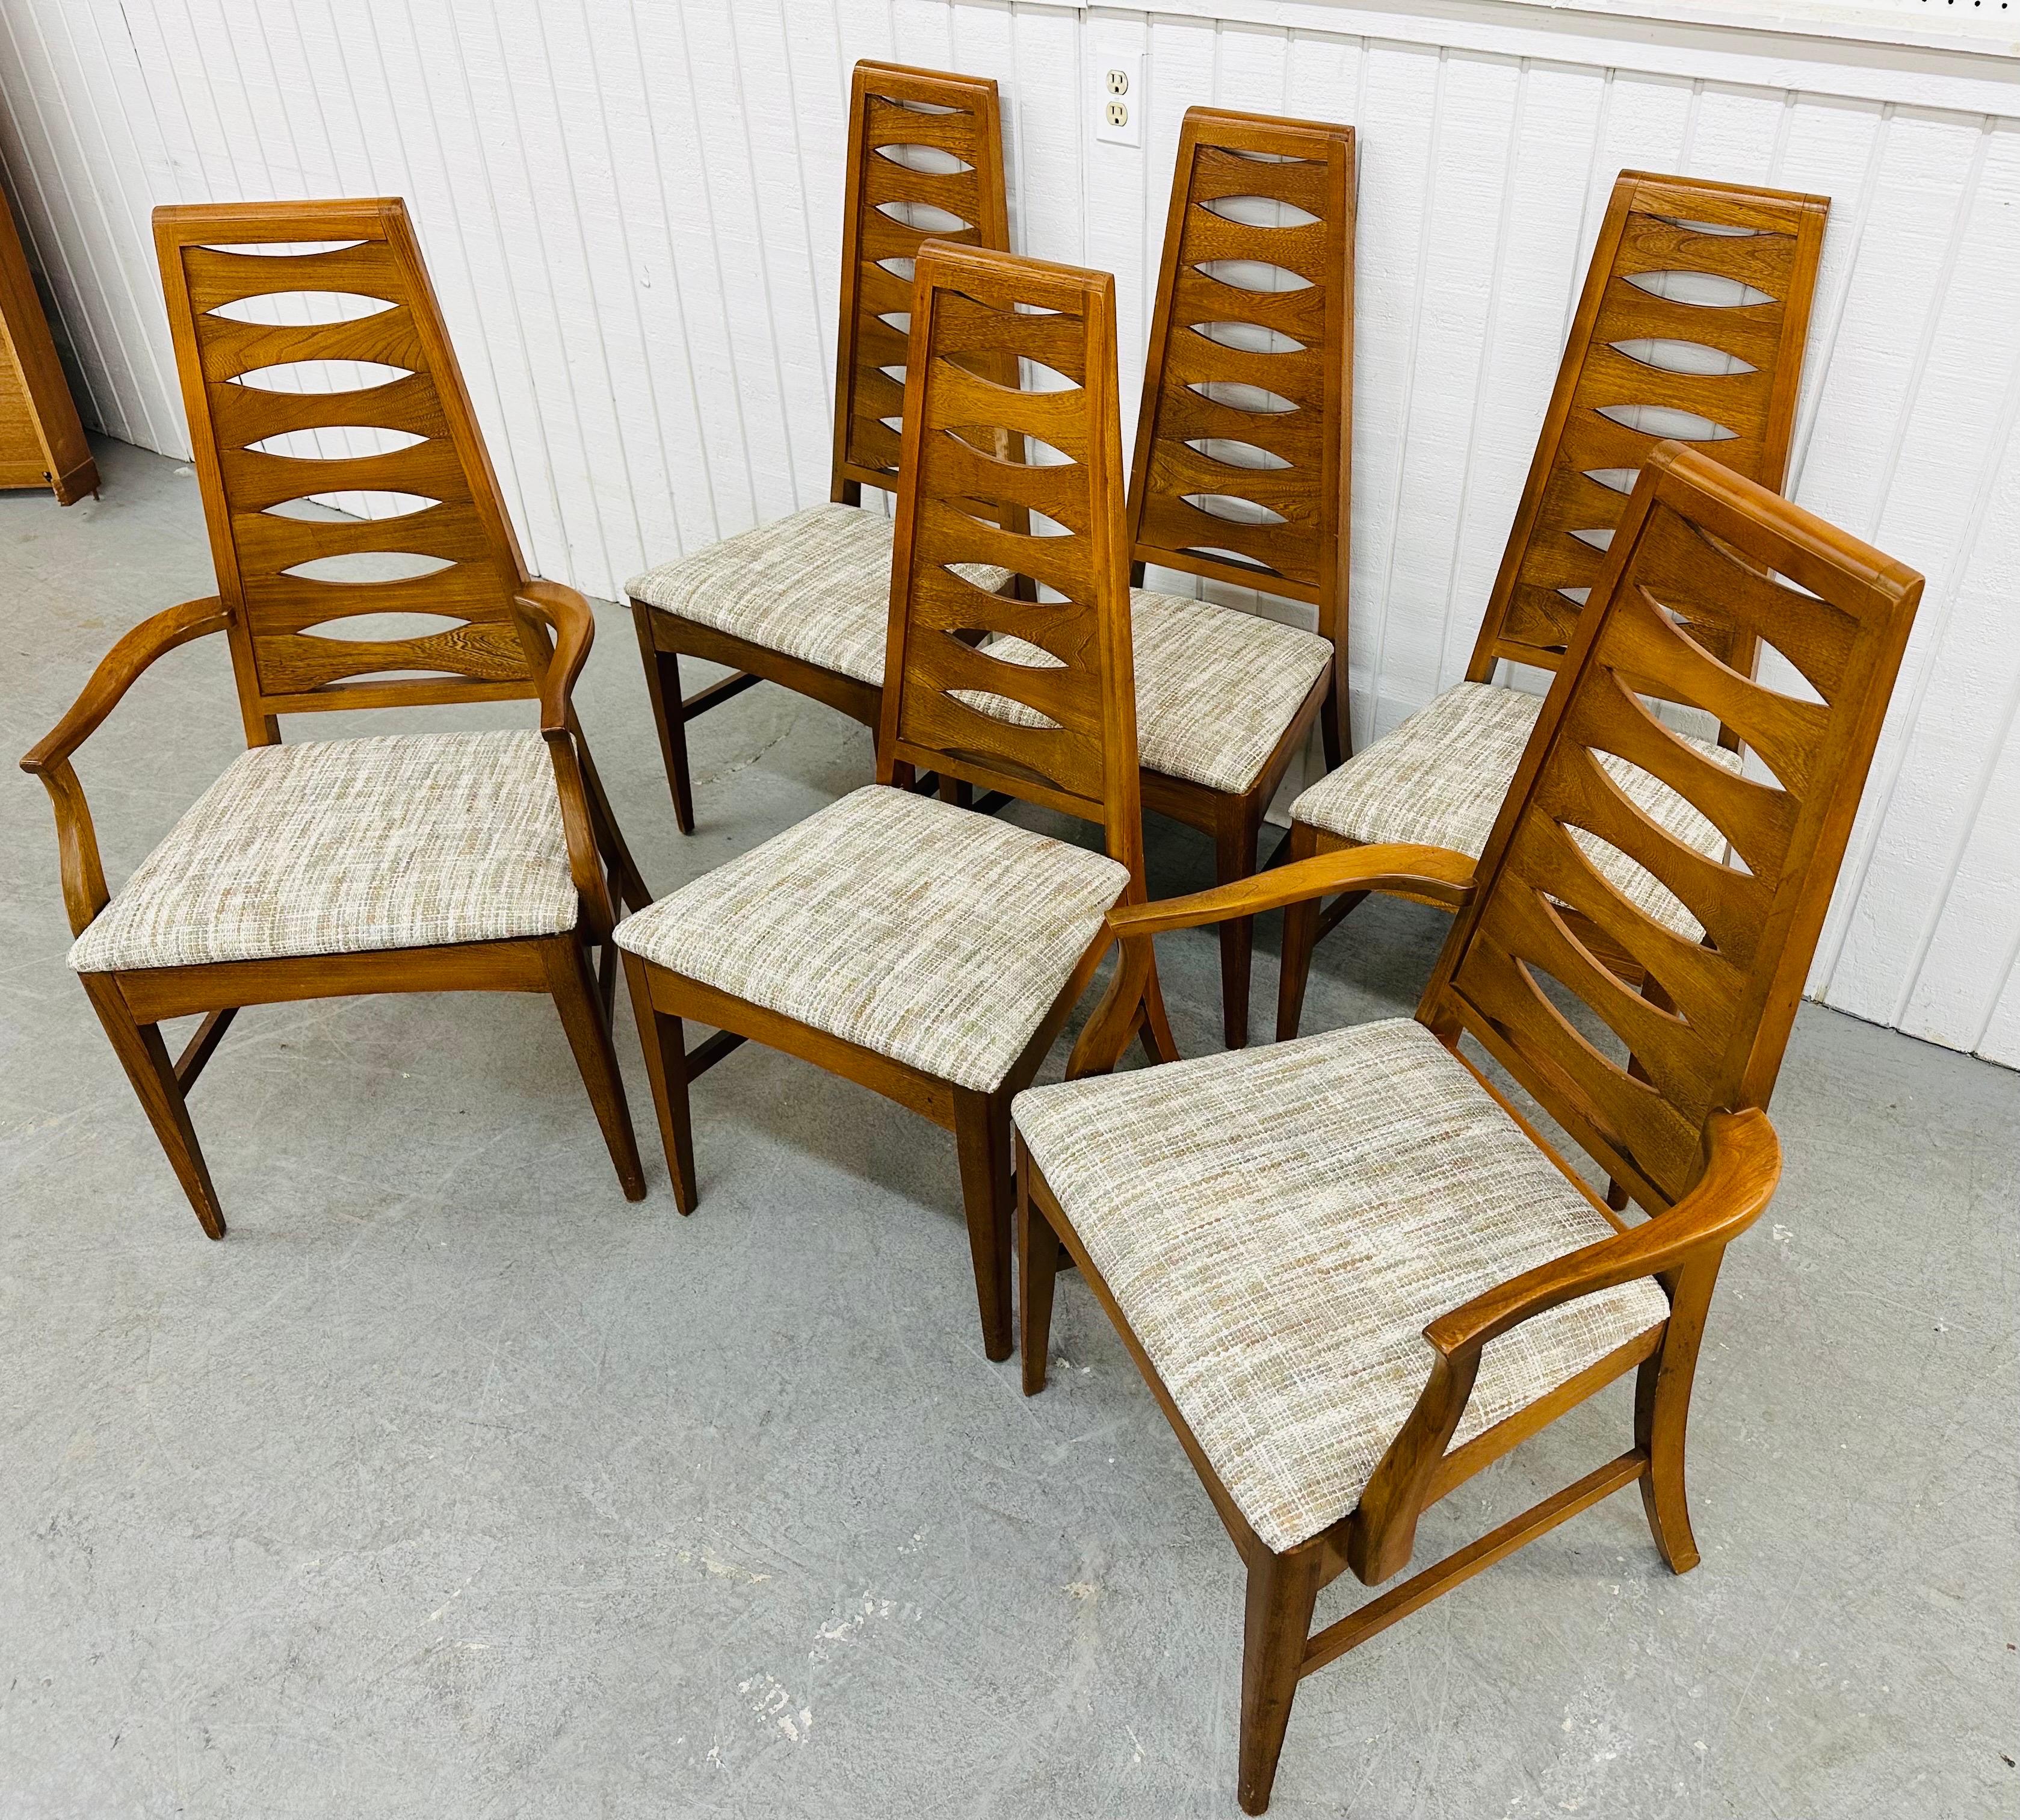 This listing is for a set of six Mid-Century Modern Young Manufacturing Walnut Catseye Dining Chairs. Featuring a high back catseye design, two arm chairs, four straight chairs, newly upholstered seats, and a beautiful walnut finish. This is an